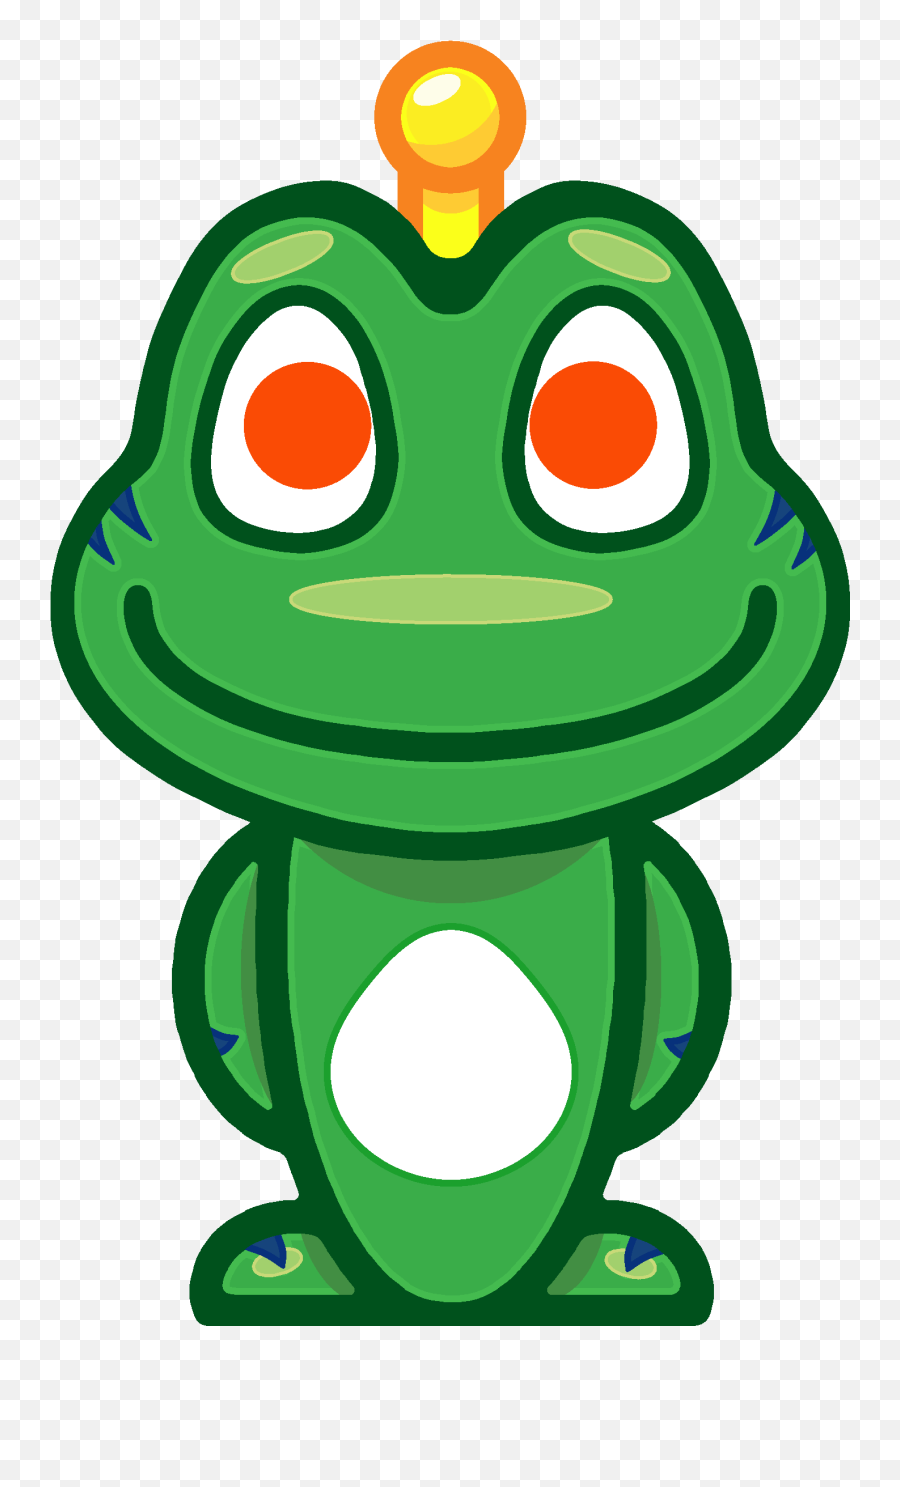 New And Improved Hd Rgeocaching Snoosignal Logo Geocaching - Reddit Logo Frog Png,Geocaching Icon